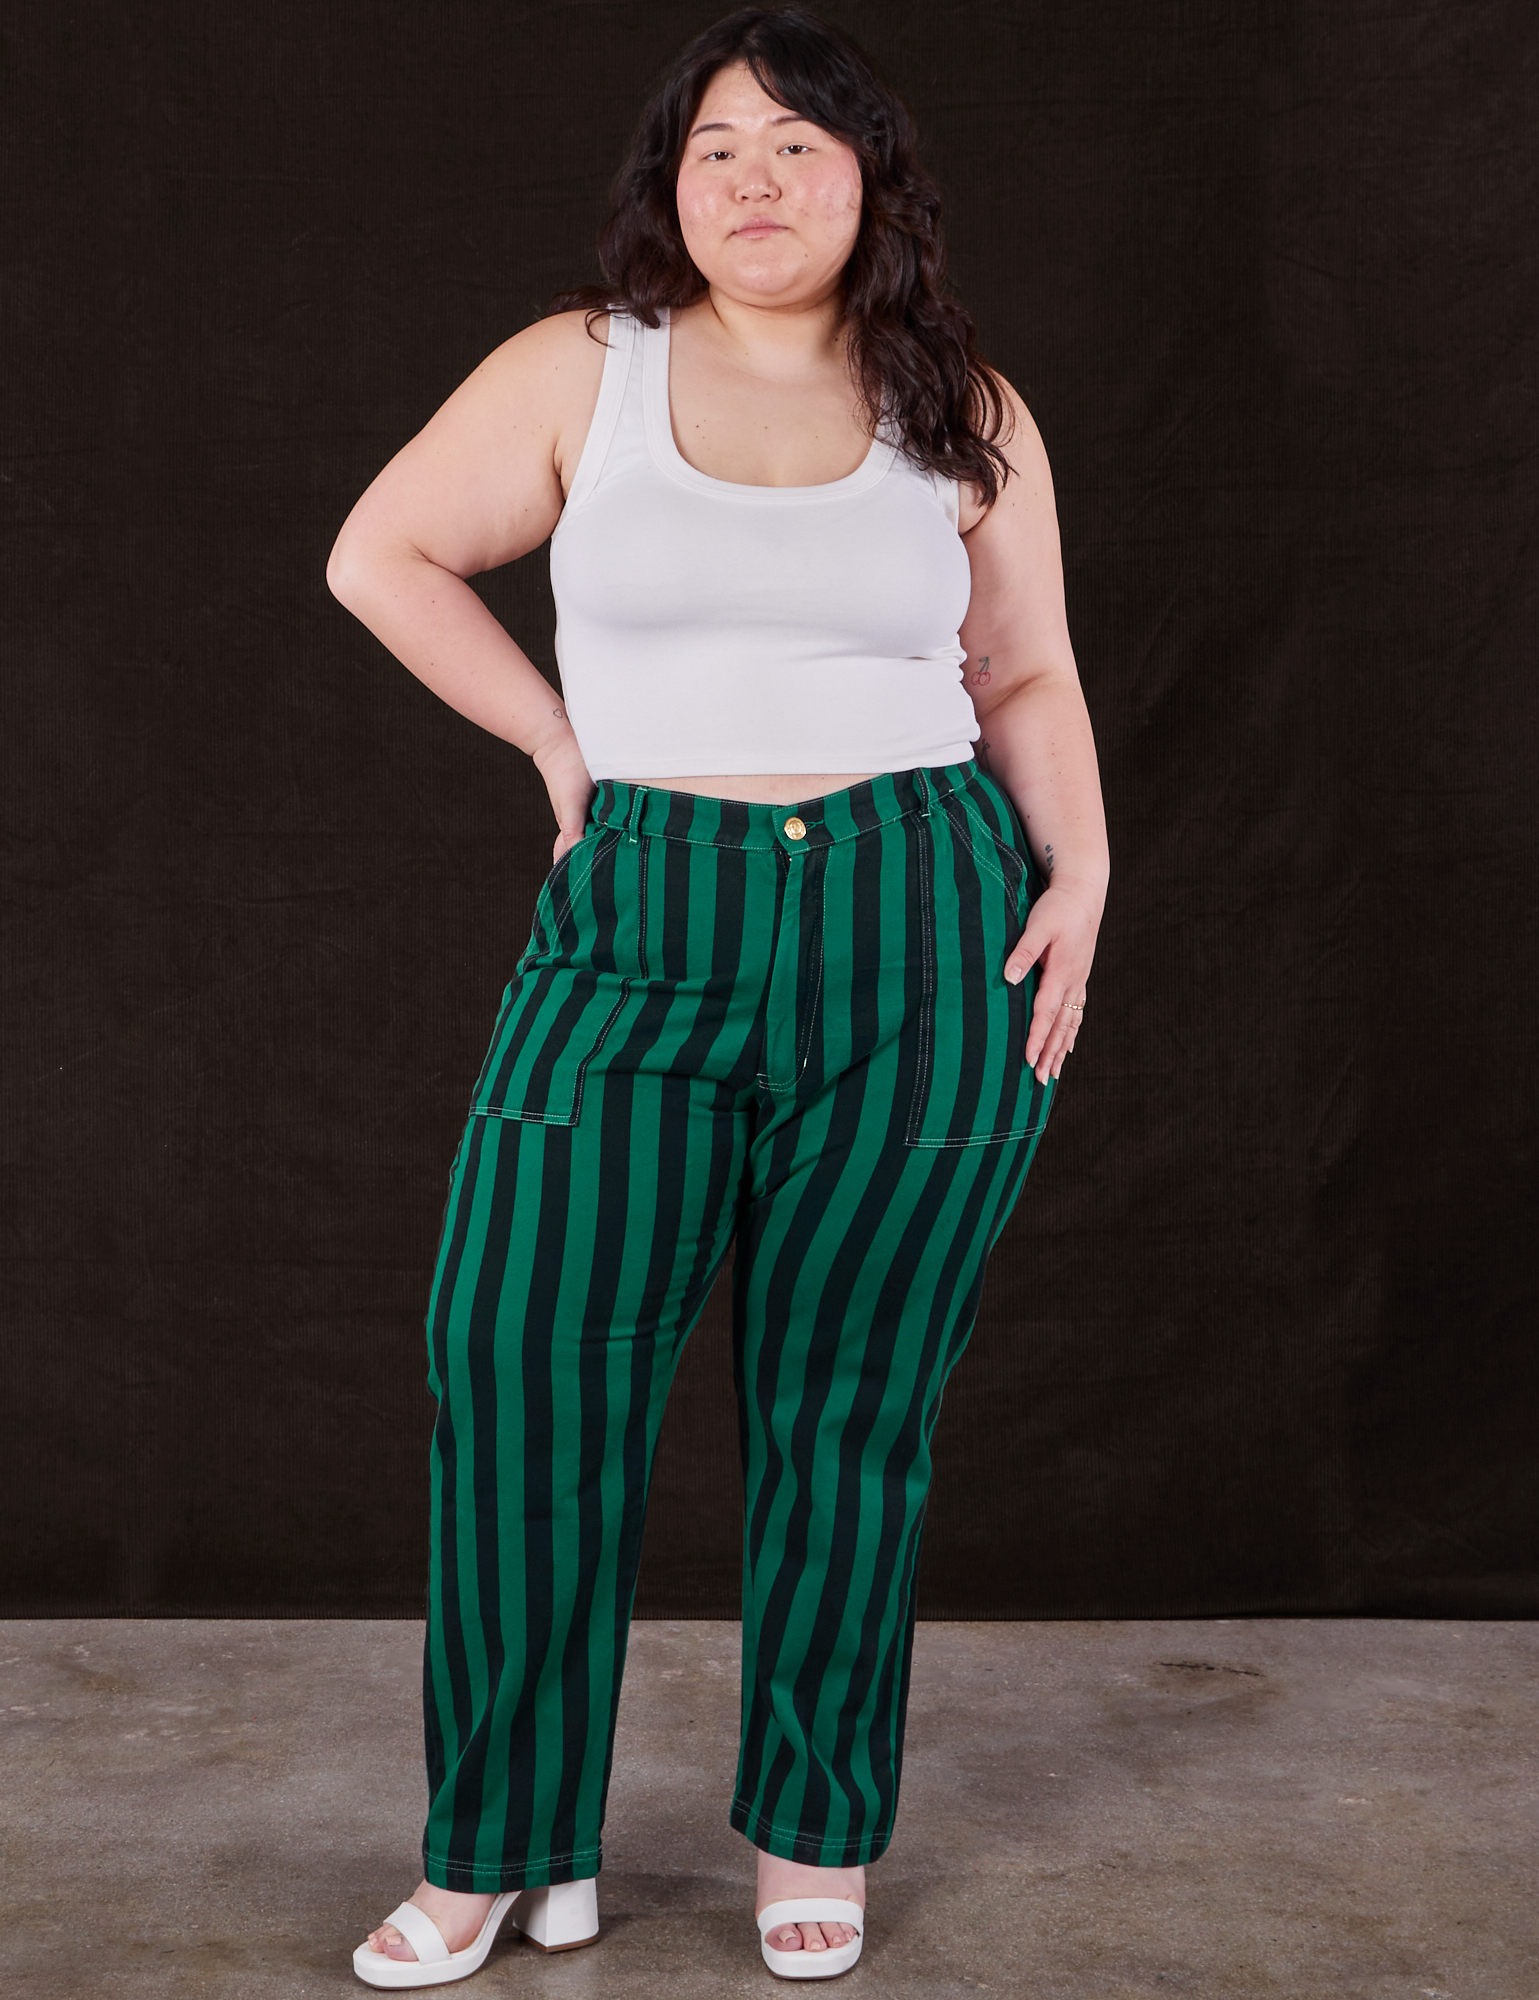 Ashley is 5’7” and wearing 1XL Black Stripe Work Pants in Hunter paired with vintage off-white Cropped Tank Top